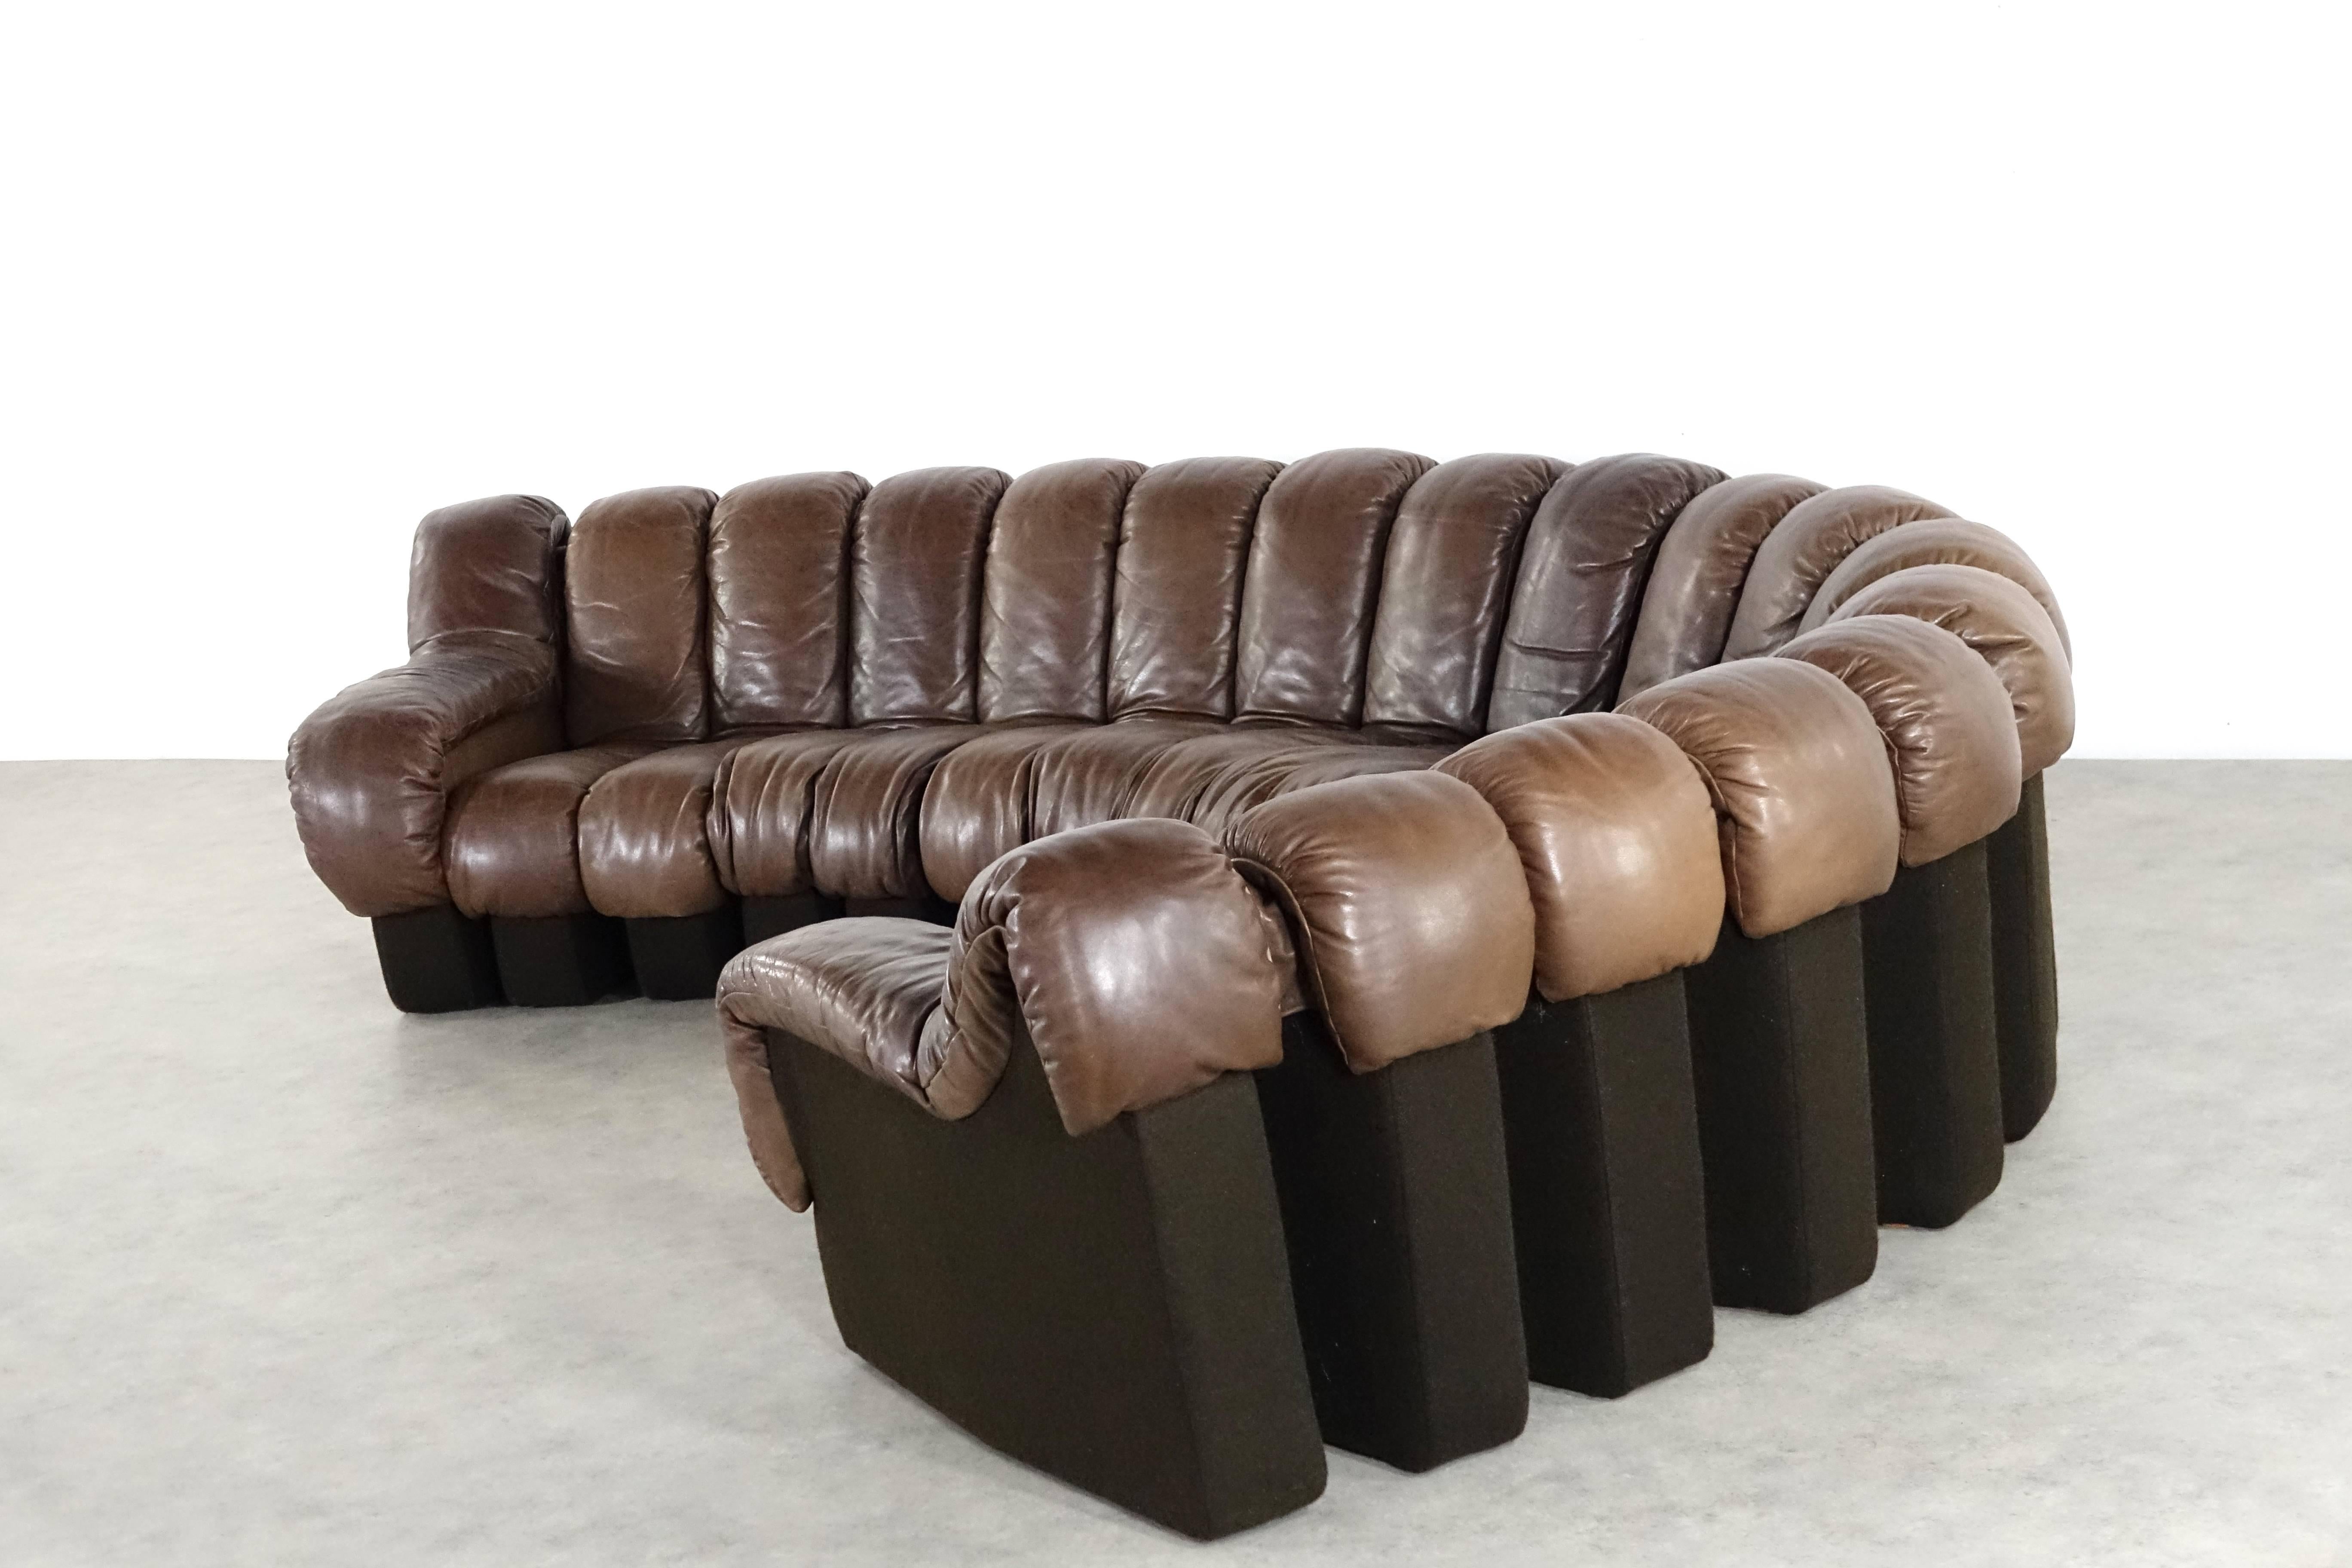 De Sede DS 600.
Design by Ueli bergere, Eleonore Peduzzi-Riva, Heinz Ulrich, Klaus Vogt, 1972.

Modulable endless highclass leather sofa...18 elements in chocolate leather! Perfect vintage condition....with very nice patina!
Non-stop, endless